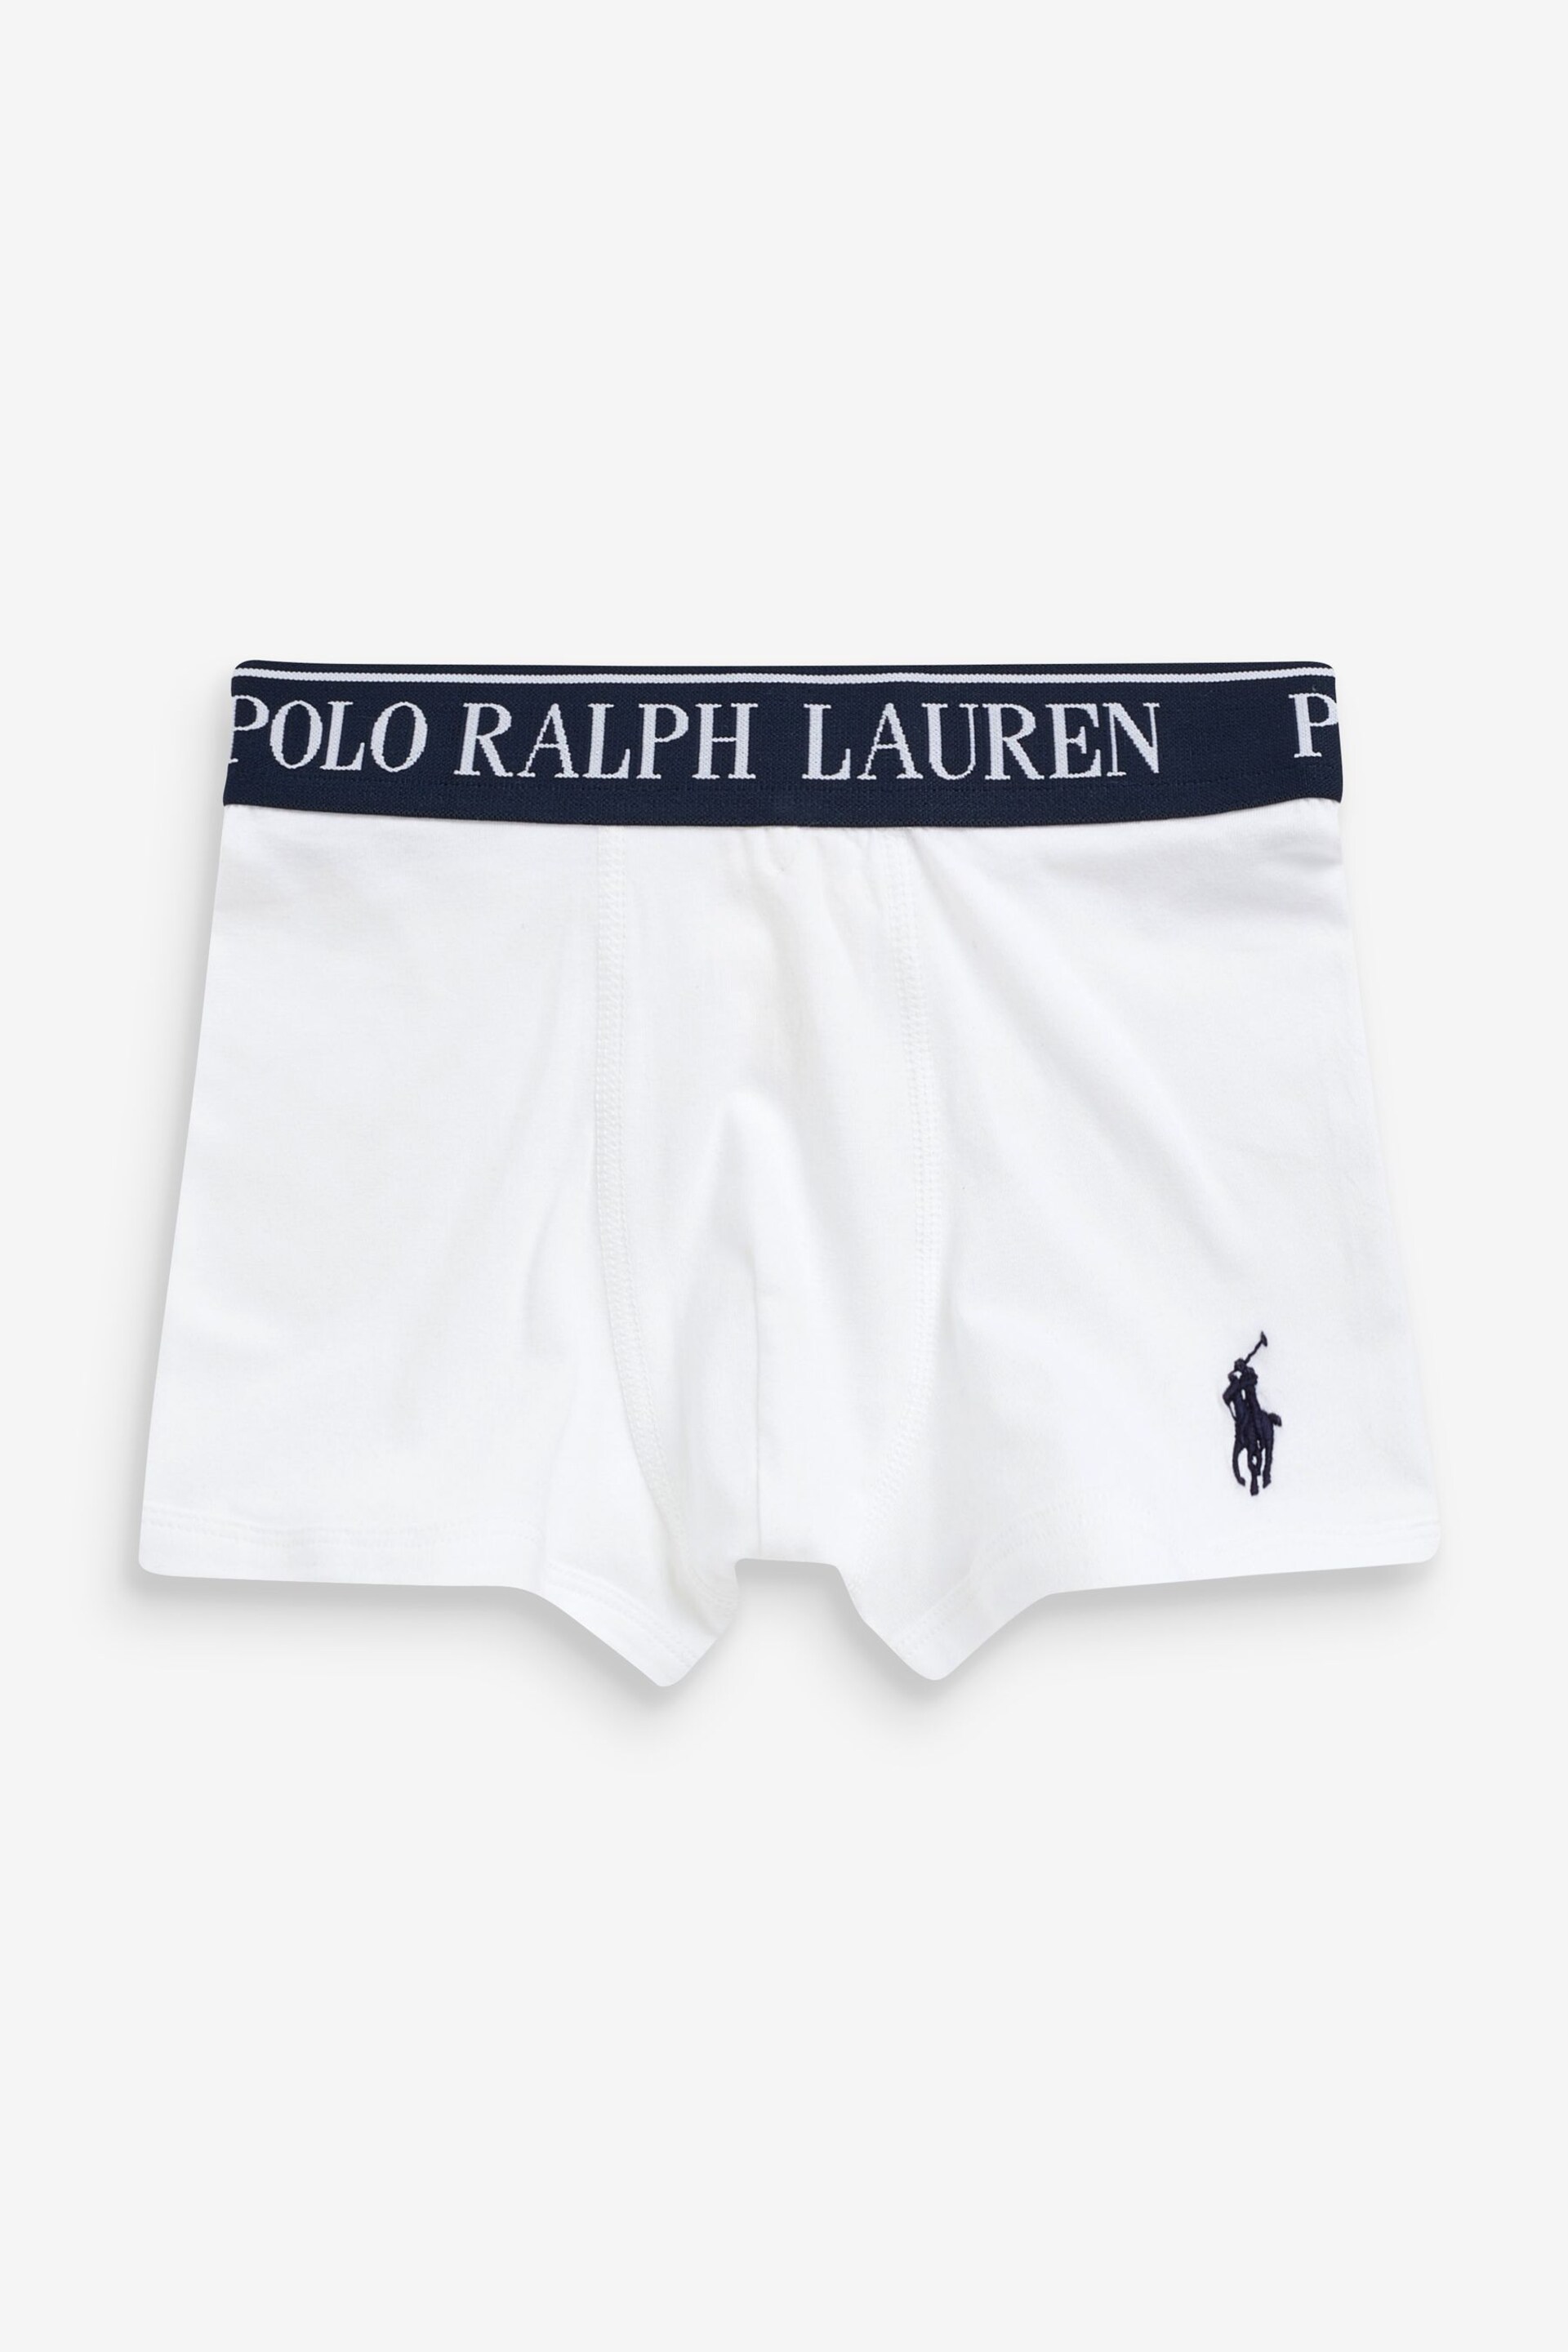 Polo Ralph Lauren Boys White Waistband Boxers 3 Pack - Image 3 of 4